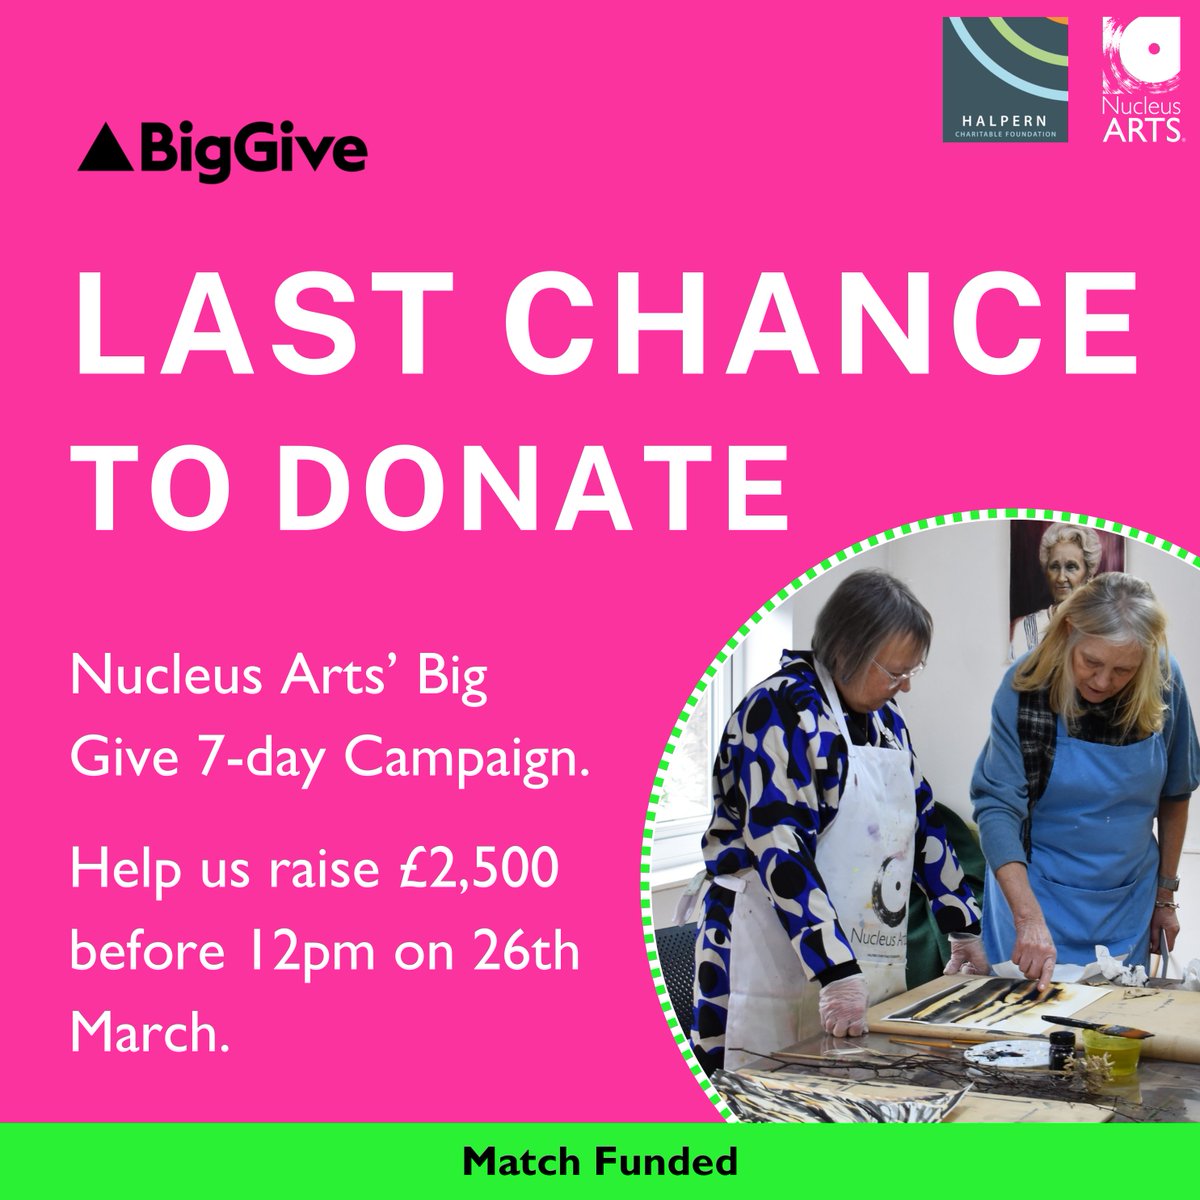 Thank you for all your donations so far, it will make a big difference to our Young at Art creative sessions for over 55s! There is still chance to donate to our match funded @BigGive campaign before it closes at 12pm tomorrow, visit nucleusarts.com/support-us #charity #donate